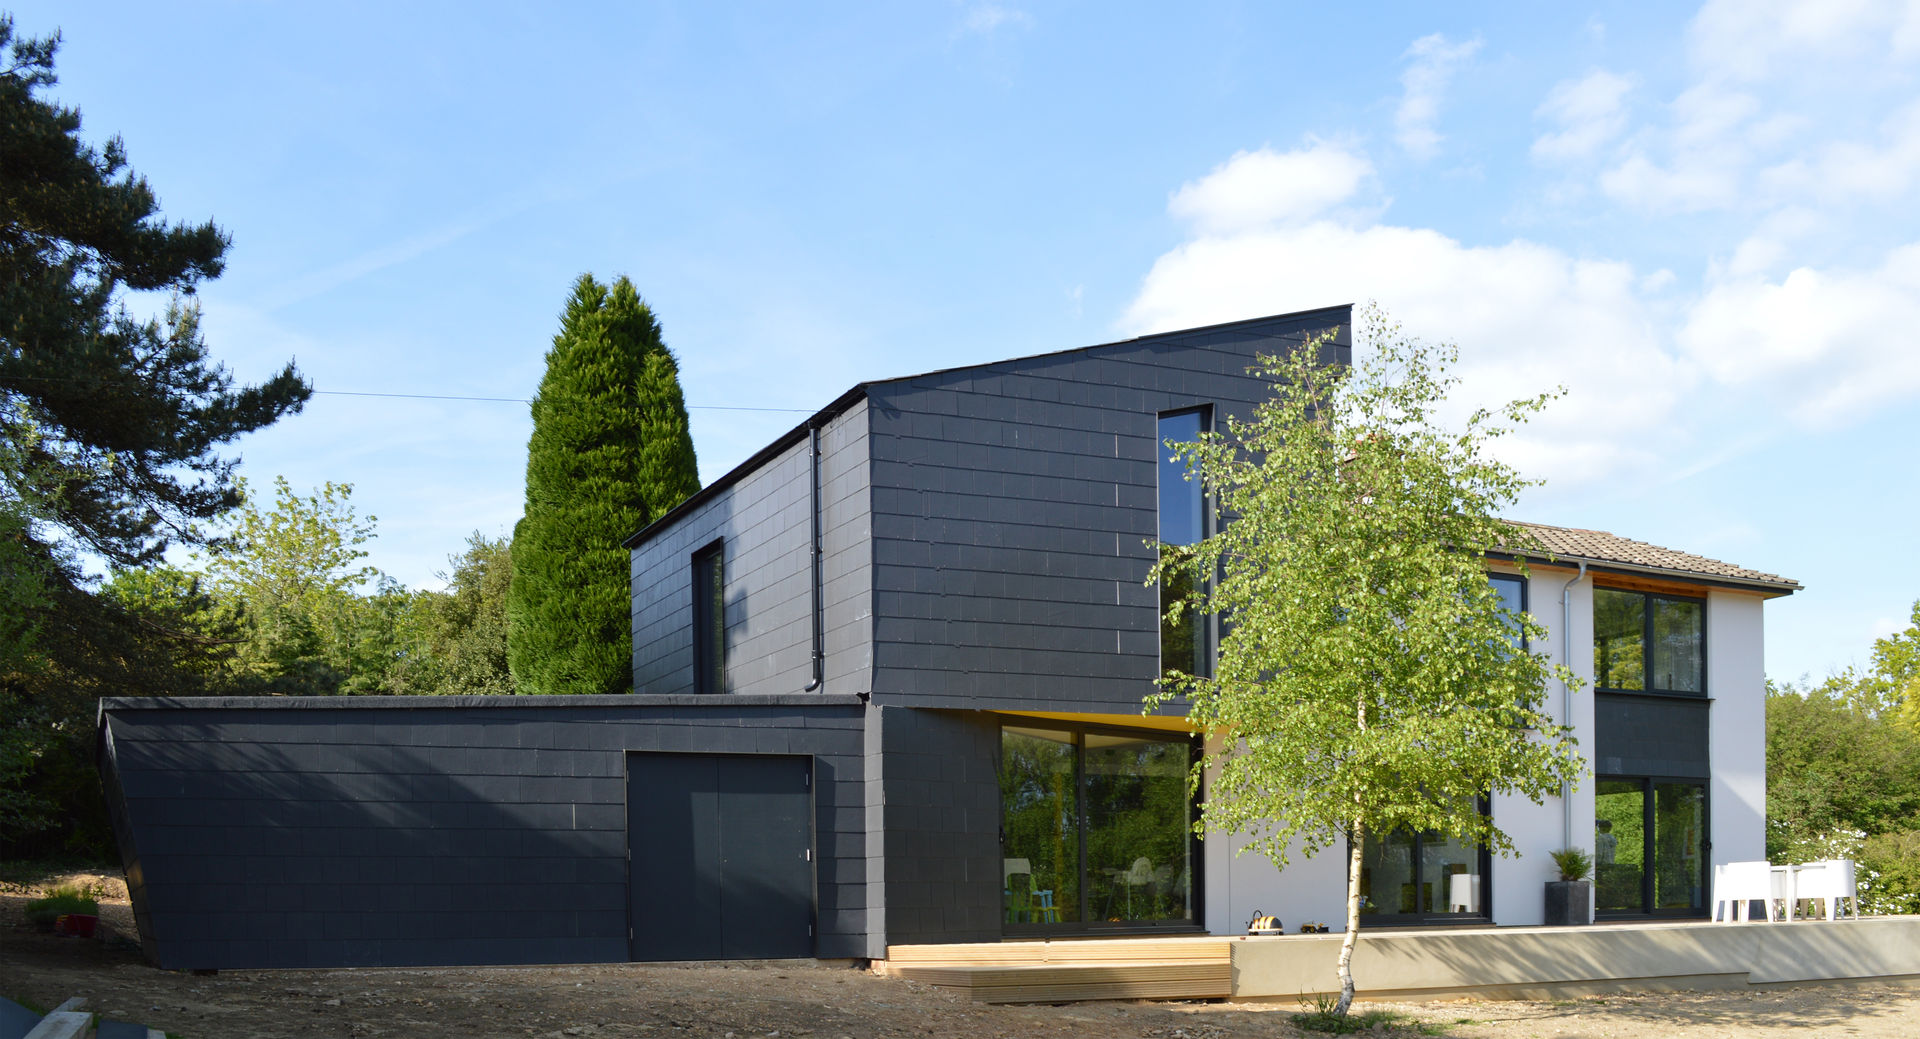 Transforming a 1960s Detached Property, Haslemere, Surrey, ArchitectureLIVE ArchitectureLIVE Rumah Modern